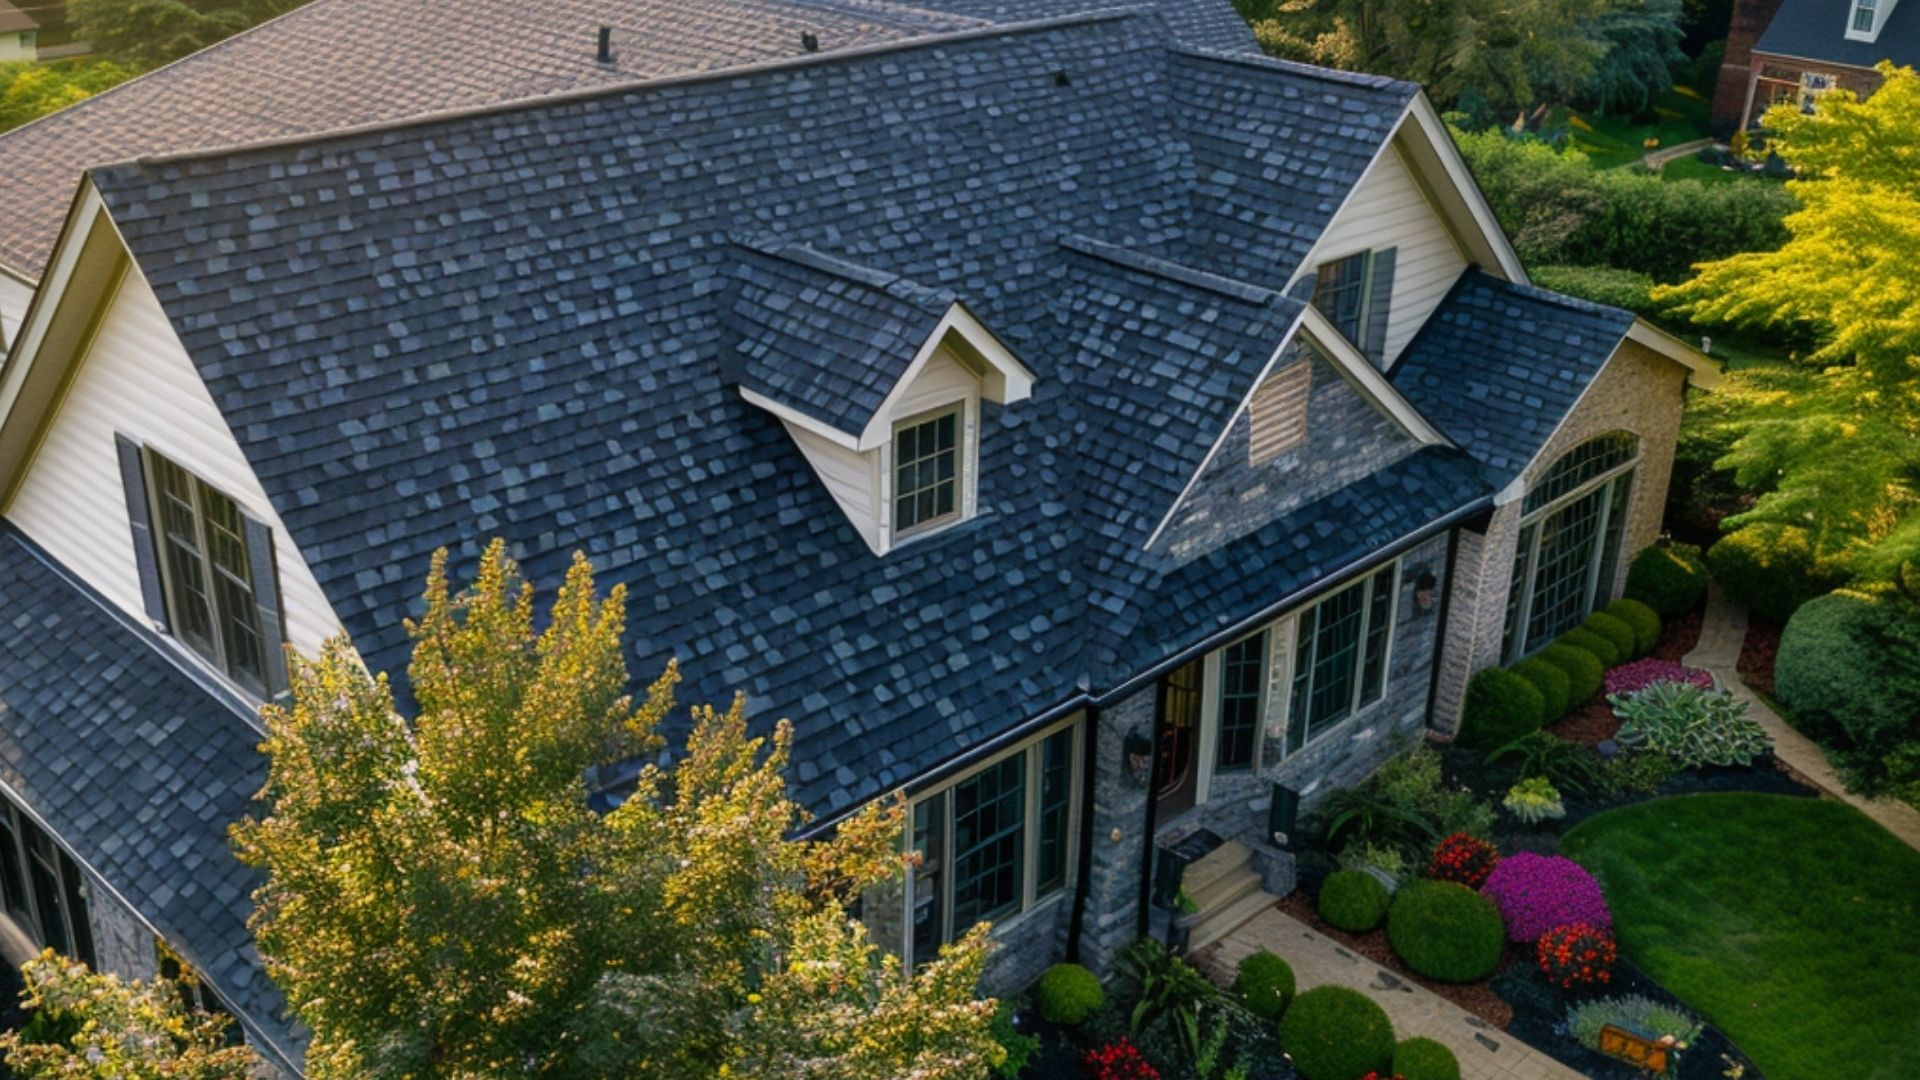 Imagine a semi-top view of a suburban house featuring asphalt roofing. The perspective is slightly elevated, capturing the roof's texture and color details up close.